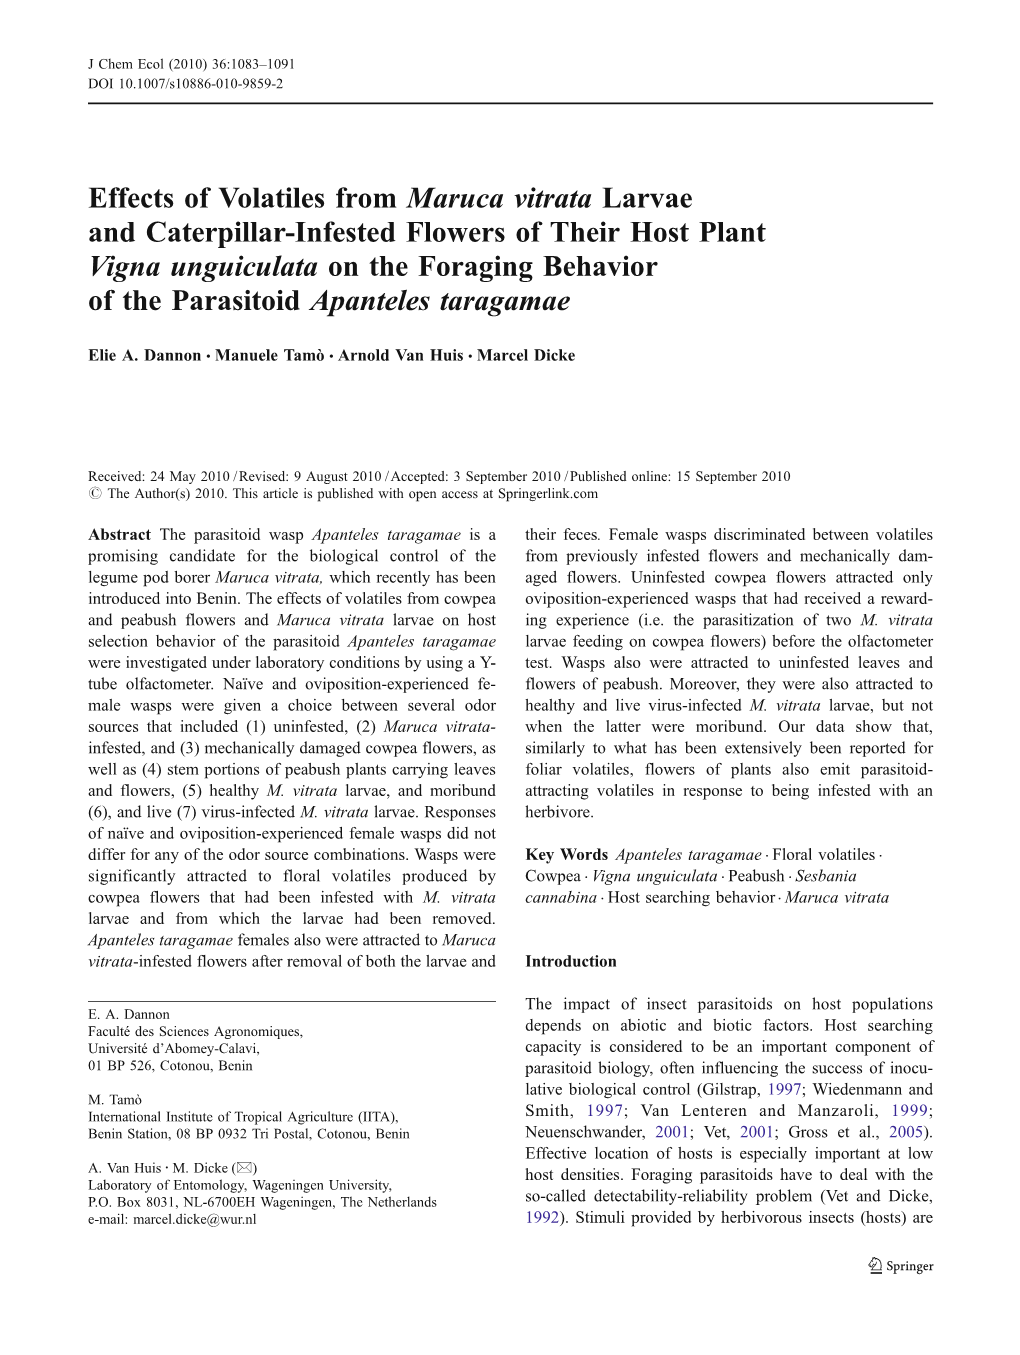 Effects of Volatiles from Maruca Vitrata Larvae and Caterpillar-Infested